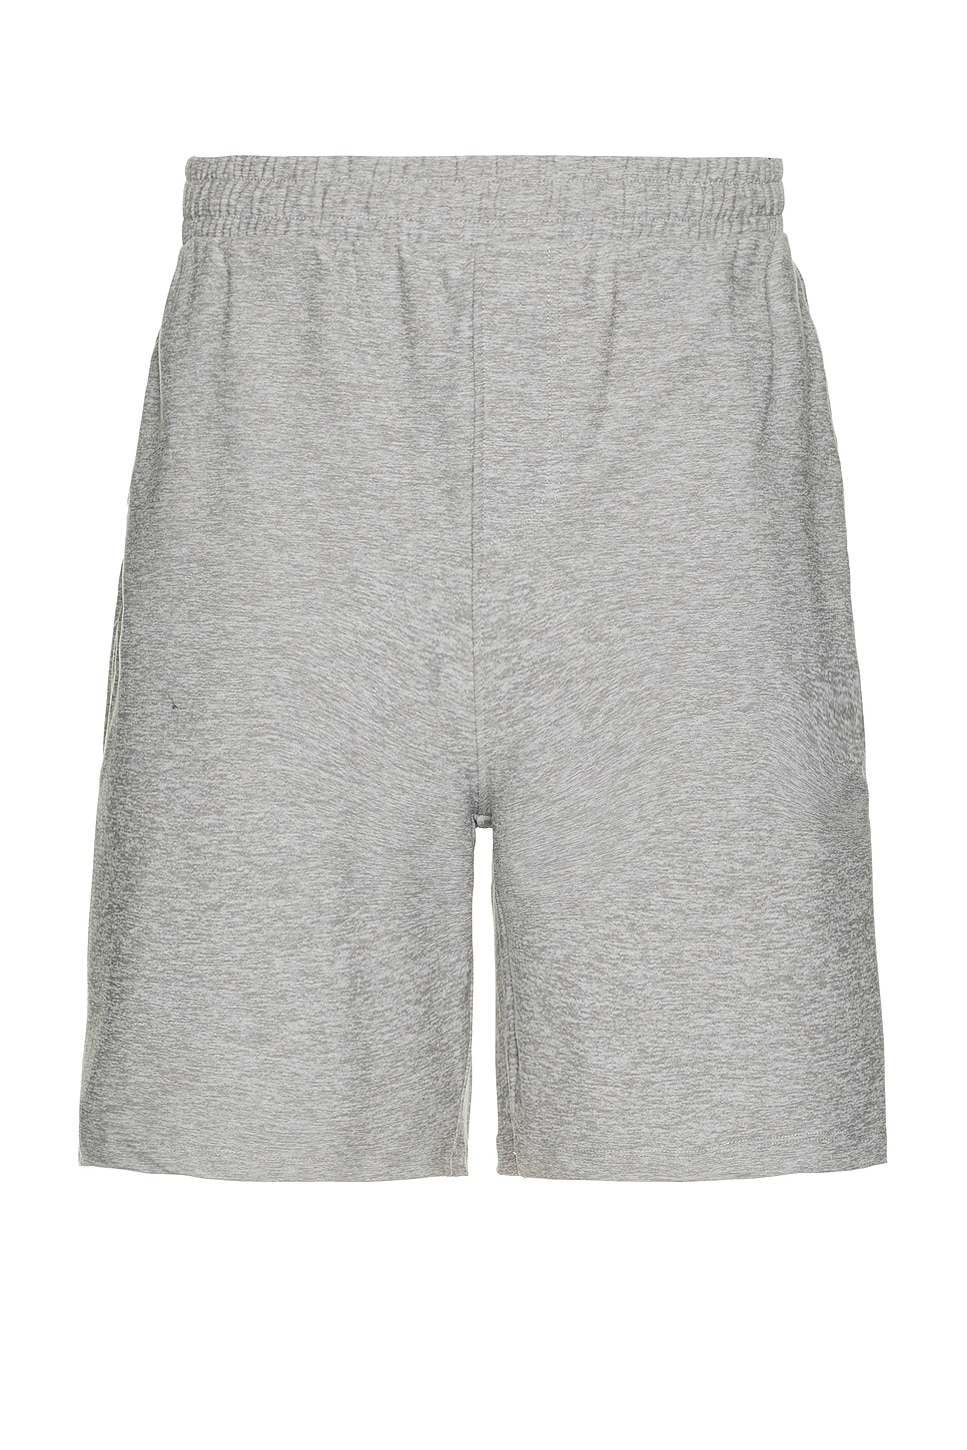 Image 1 of Beyond Yoga Take It Easy Short in Silver Mist